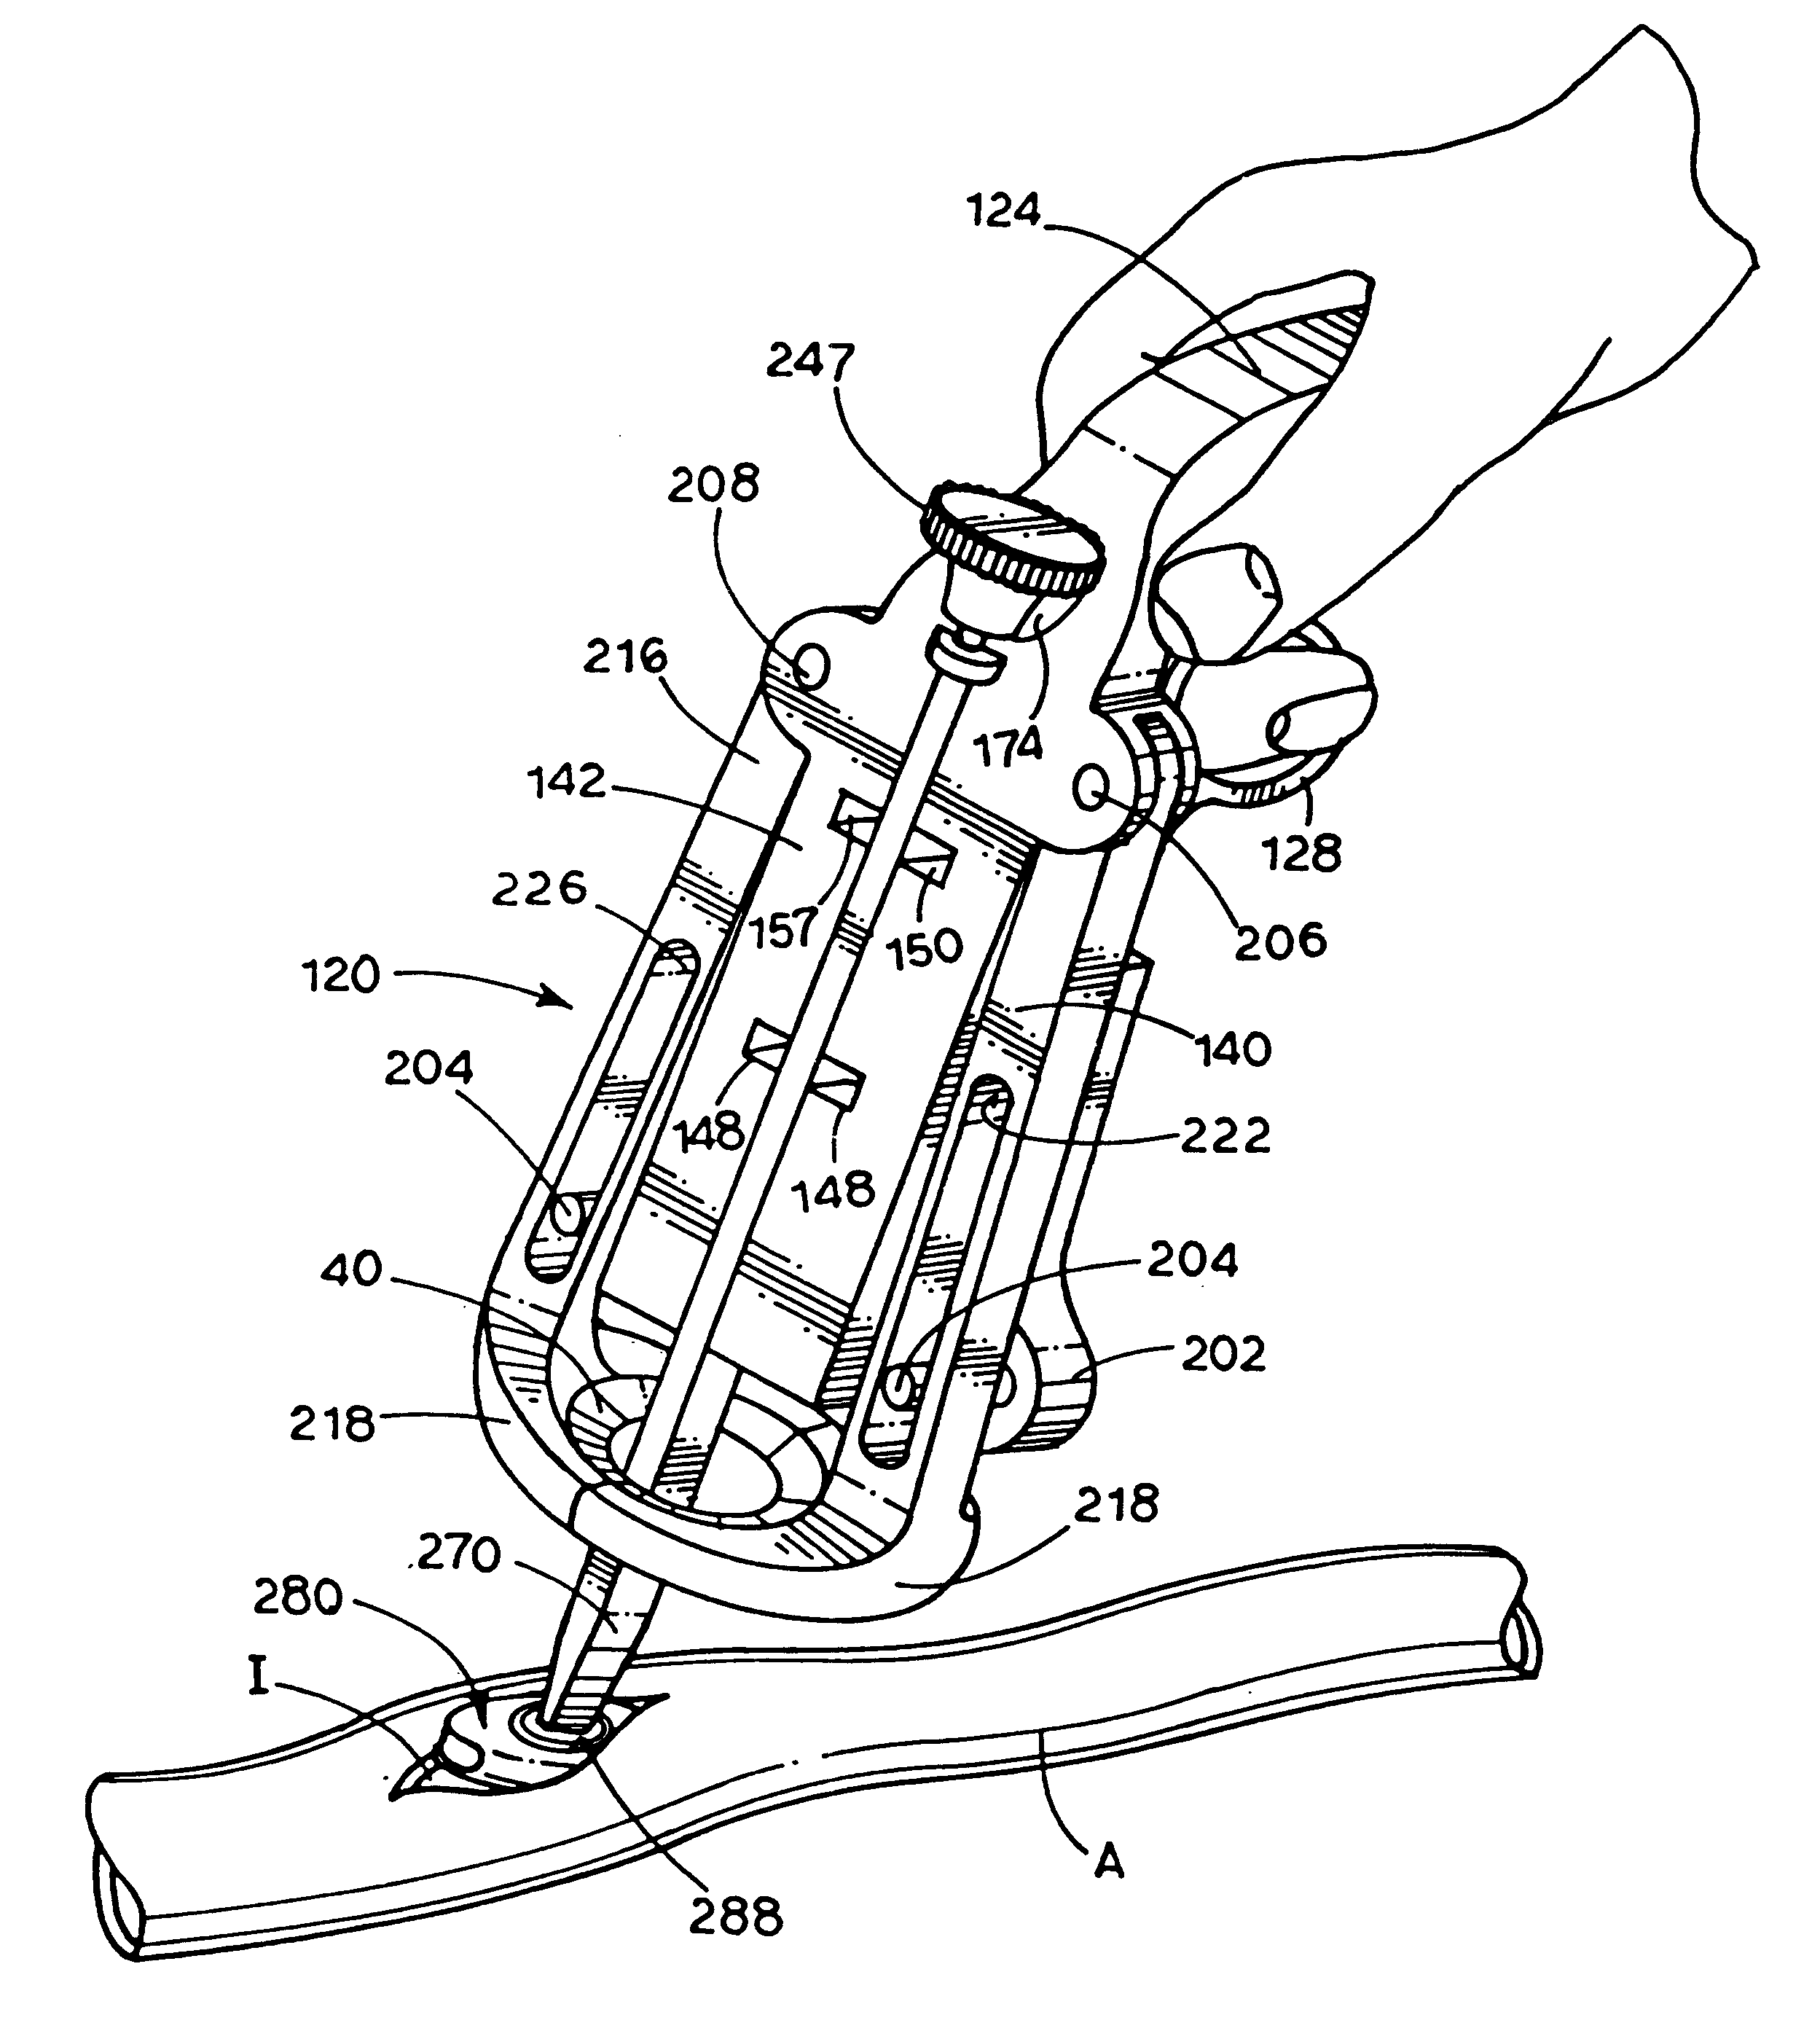 Means and method for performing an anastomosis